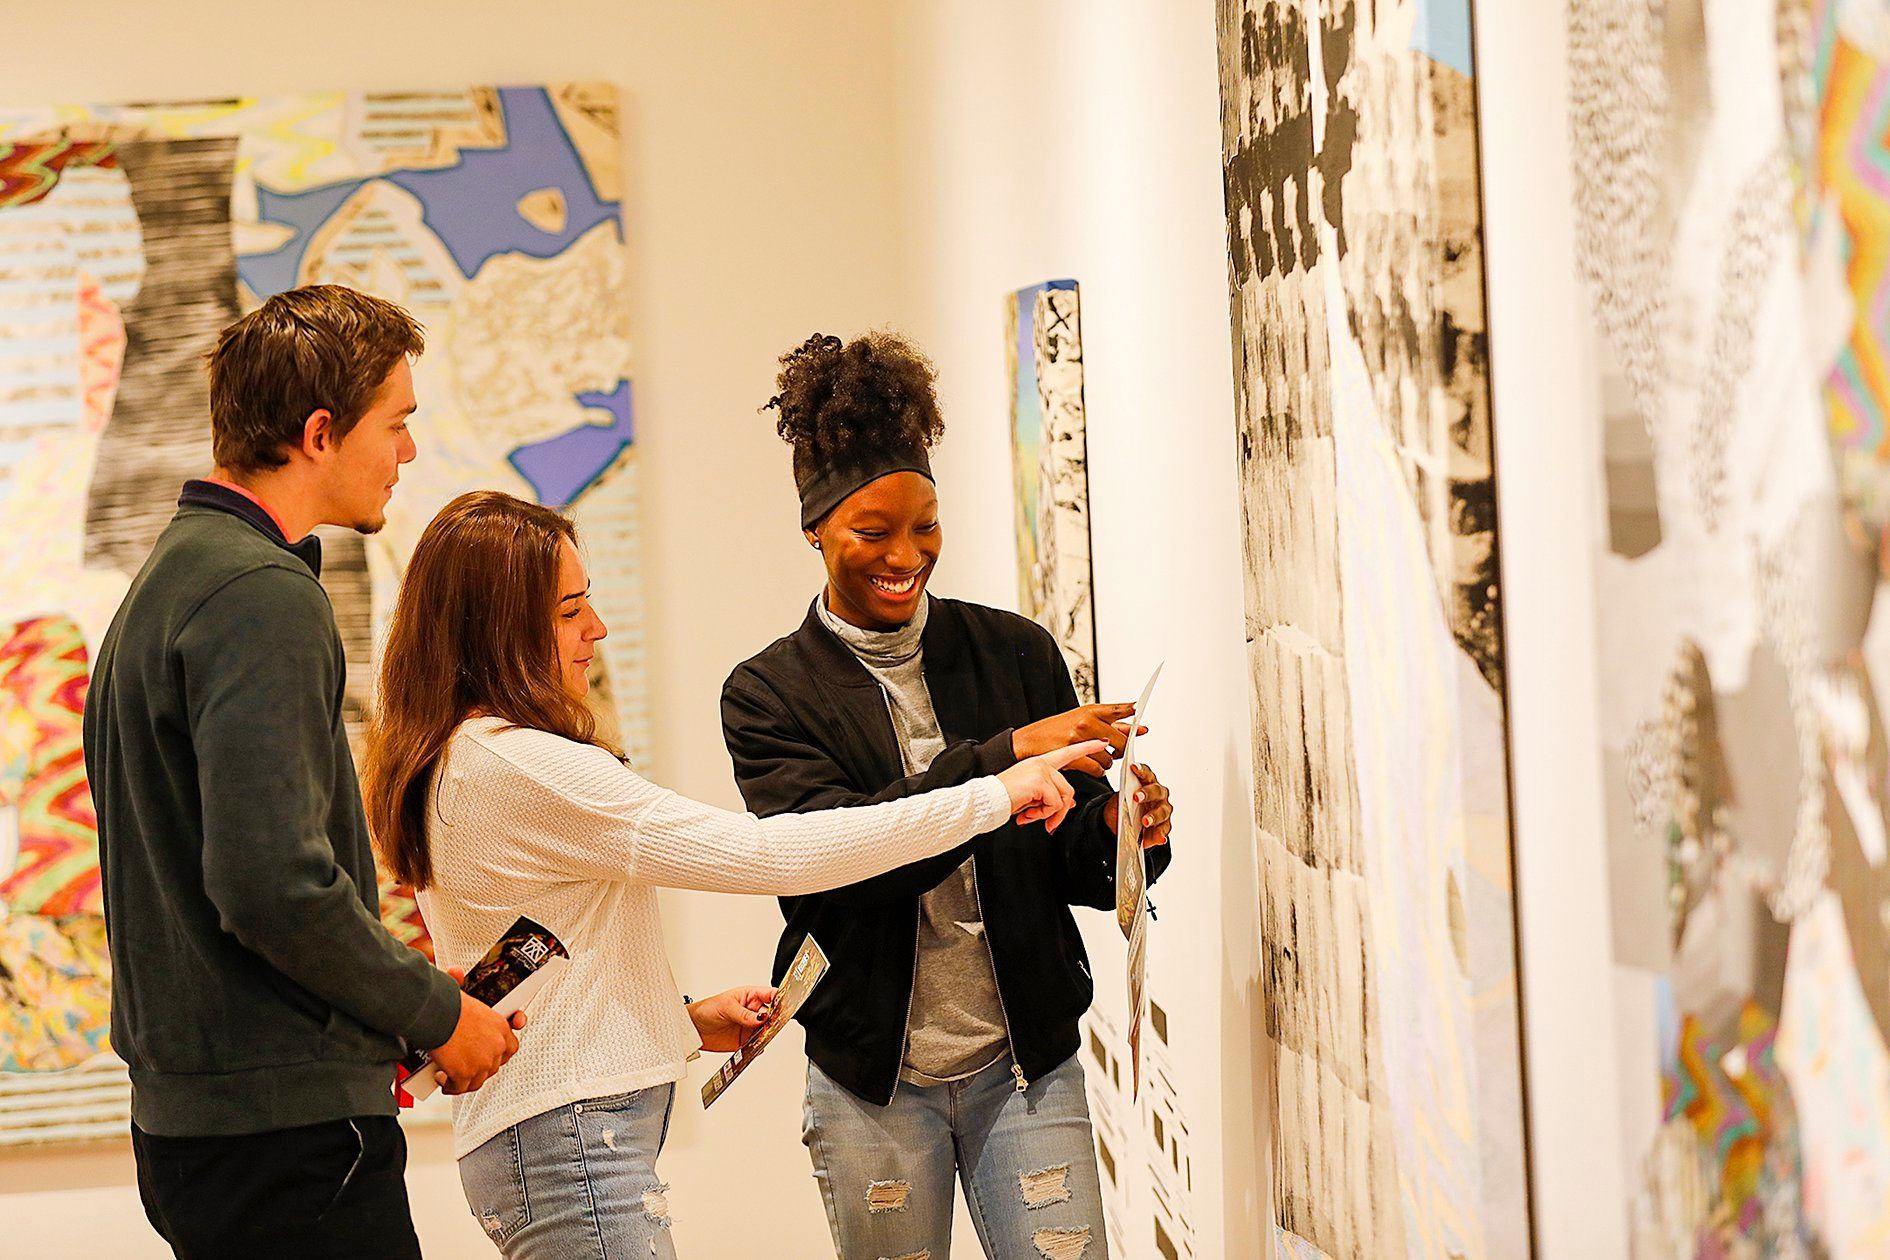 Three students looking at an art on the wall.